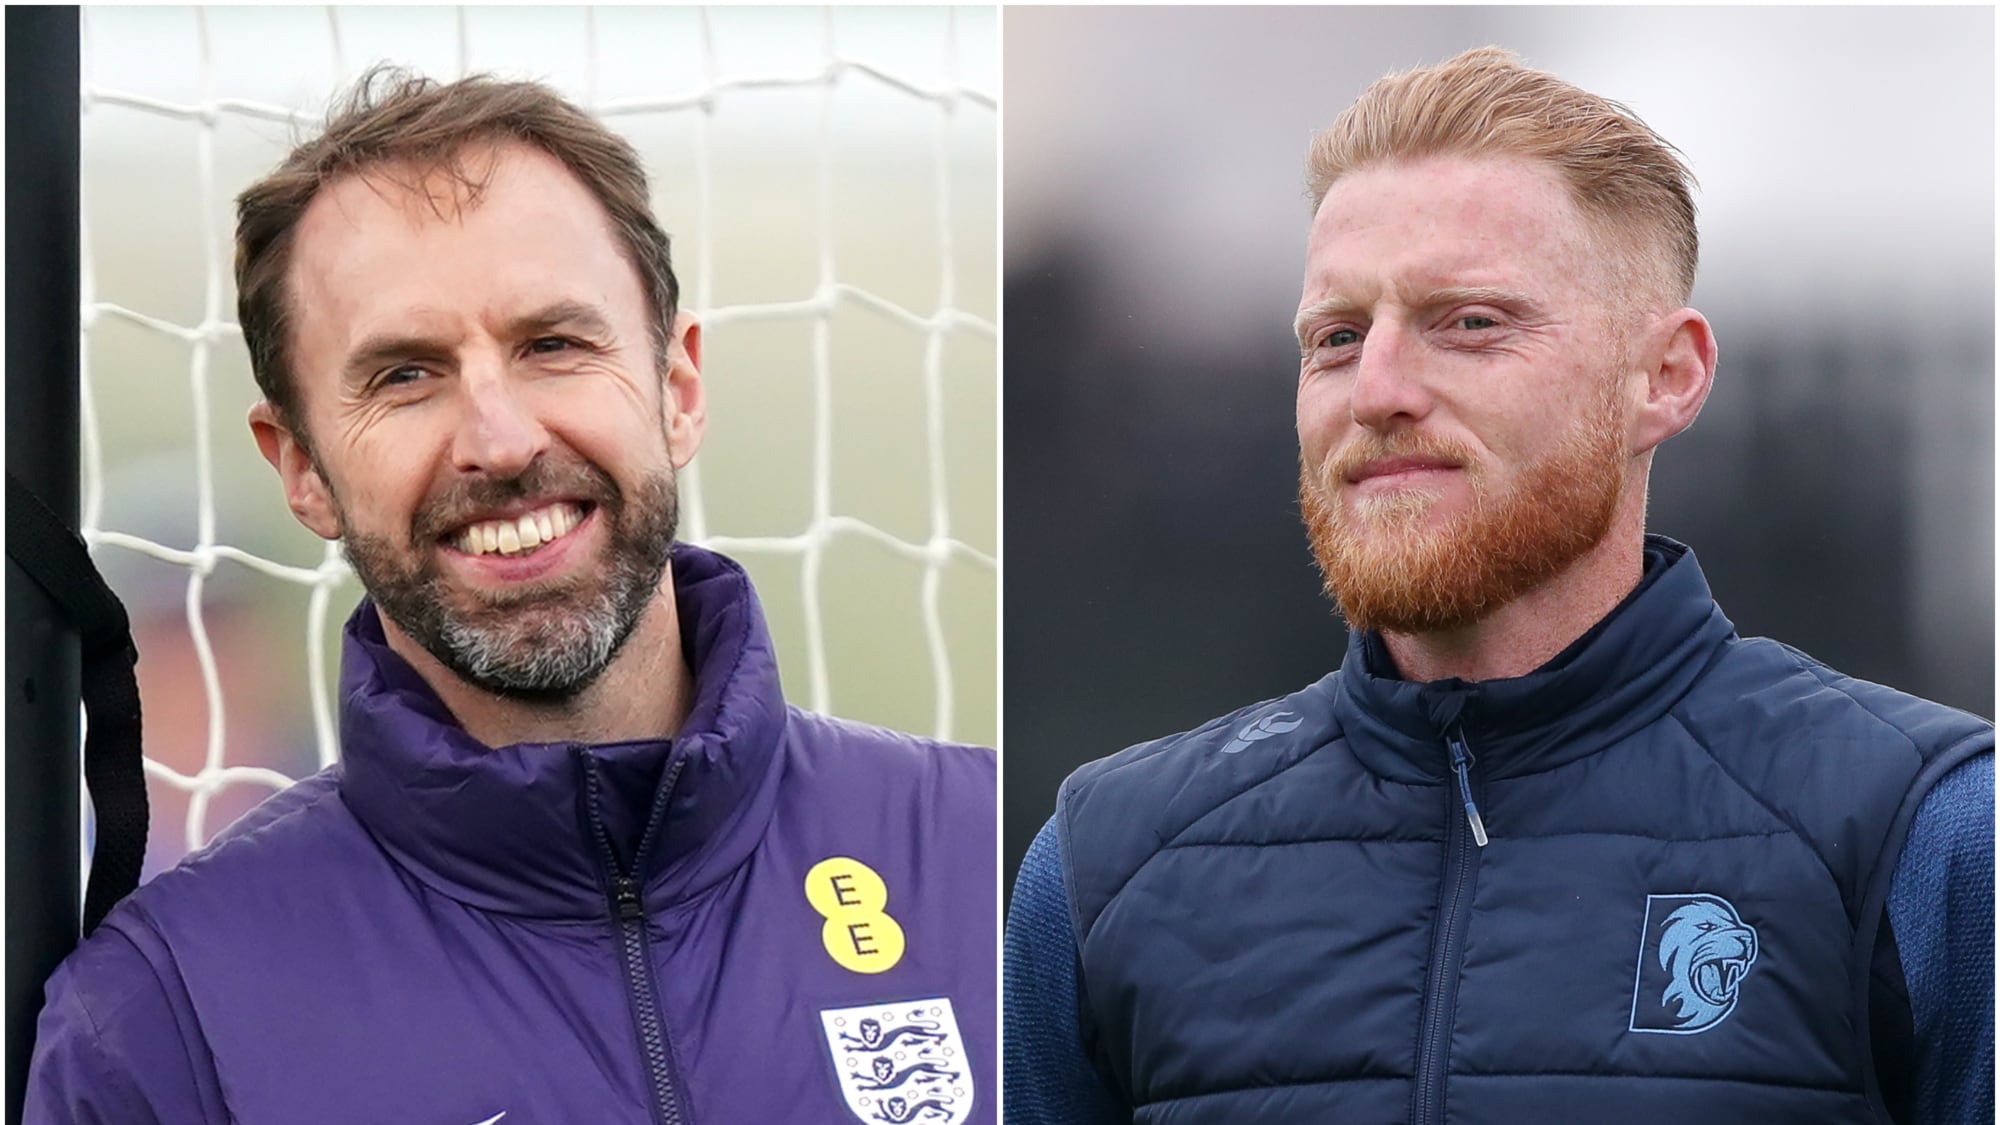 Gareth Southgate believes England’s Euros bid will benefit from cricket star Ben Stokes’ “brilliant session”